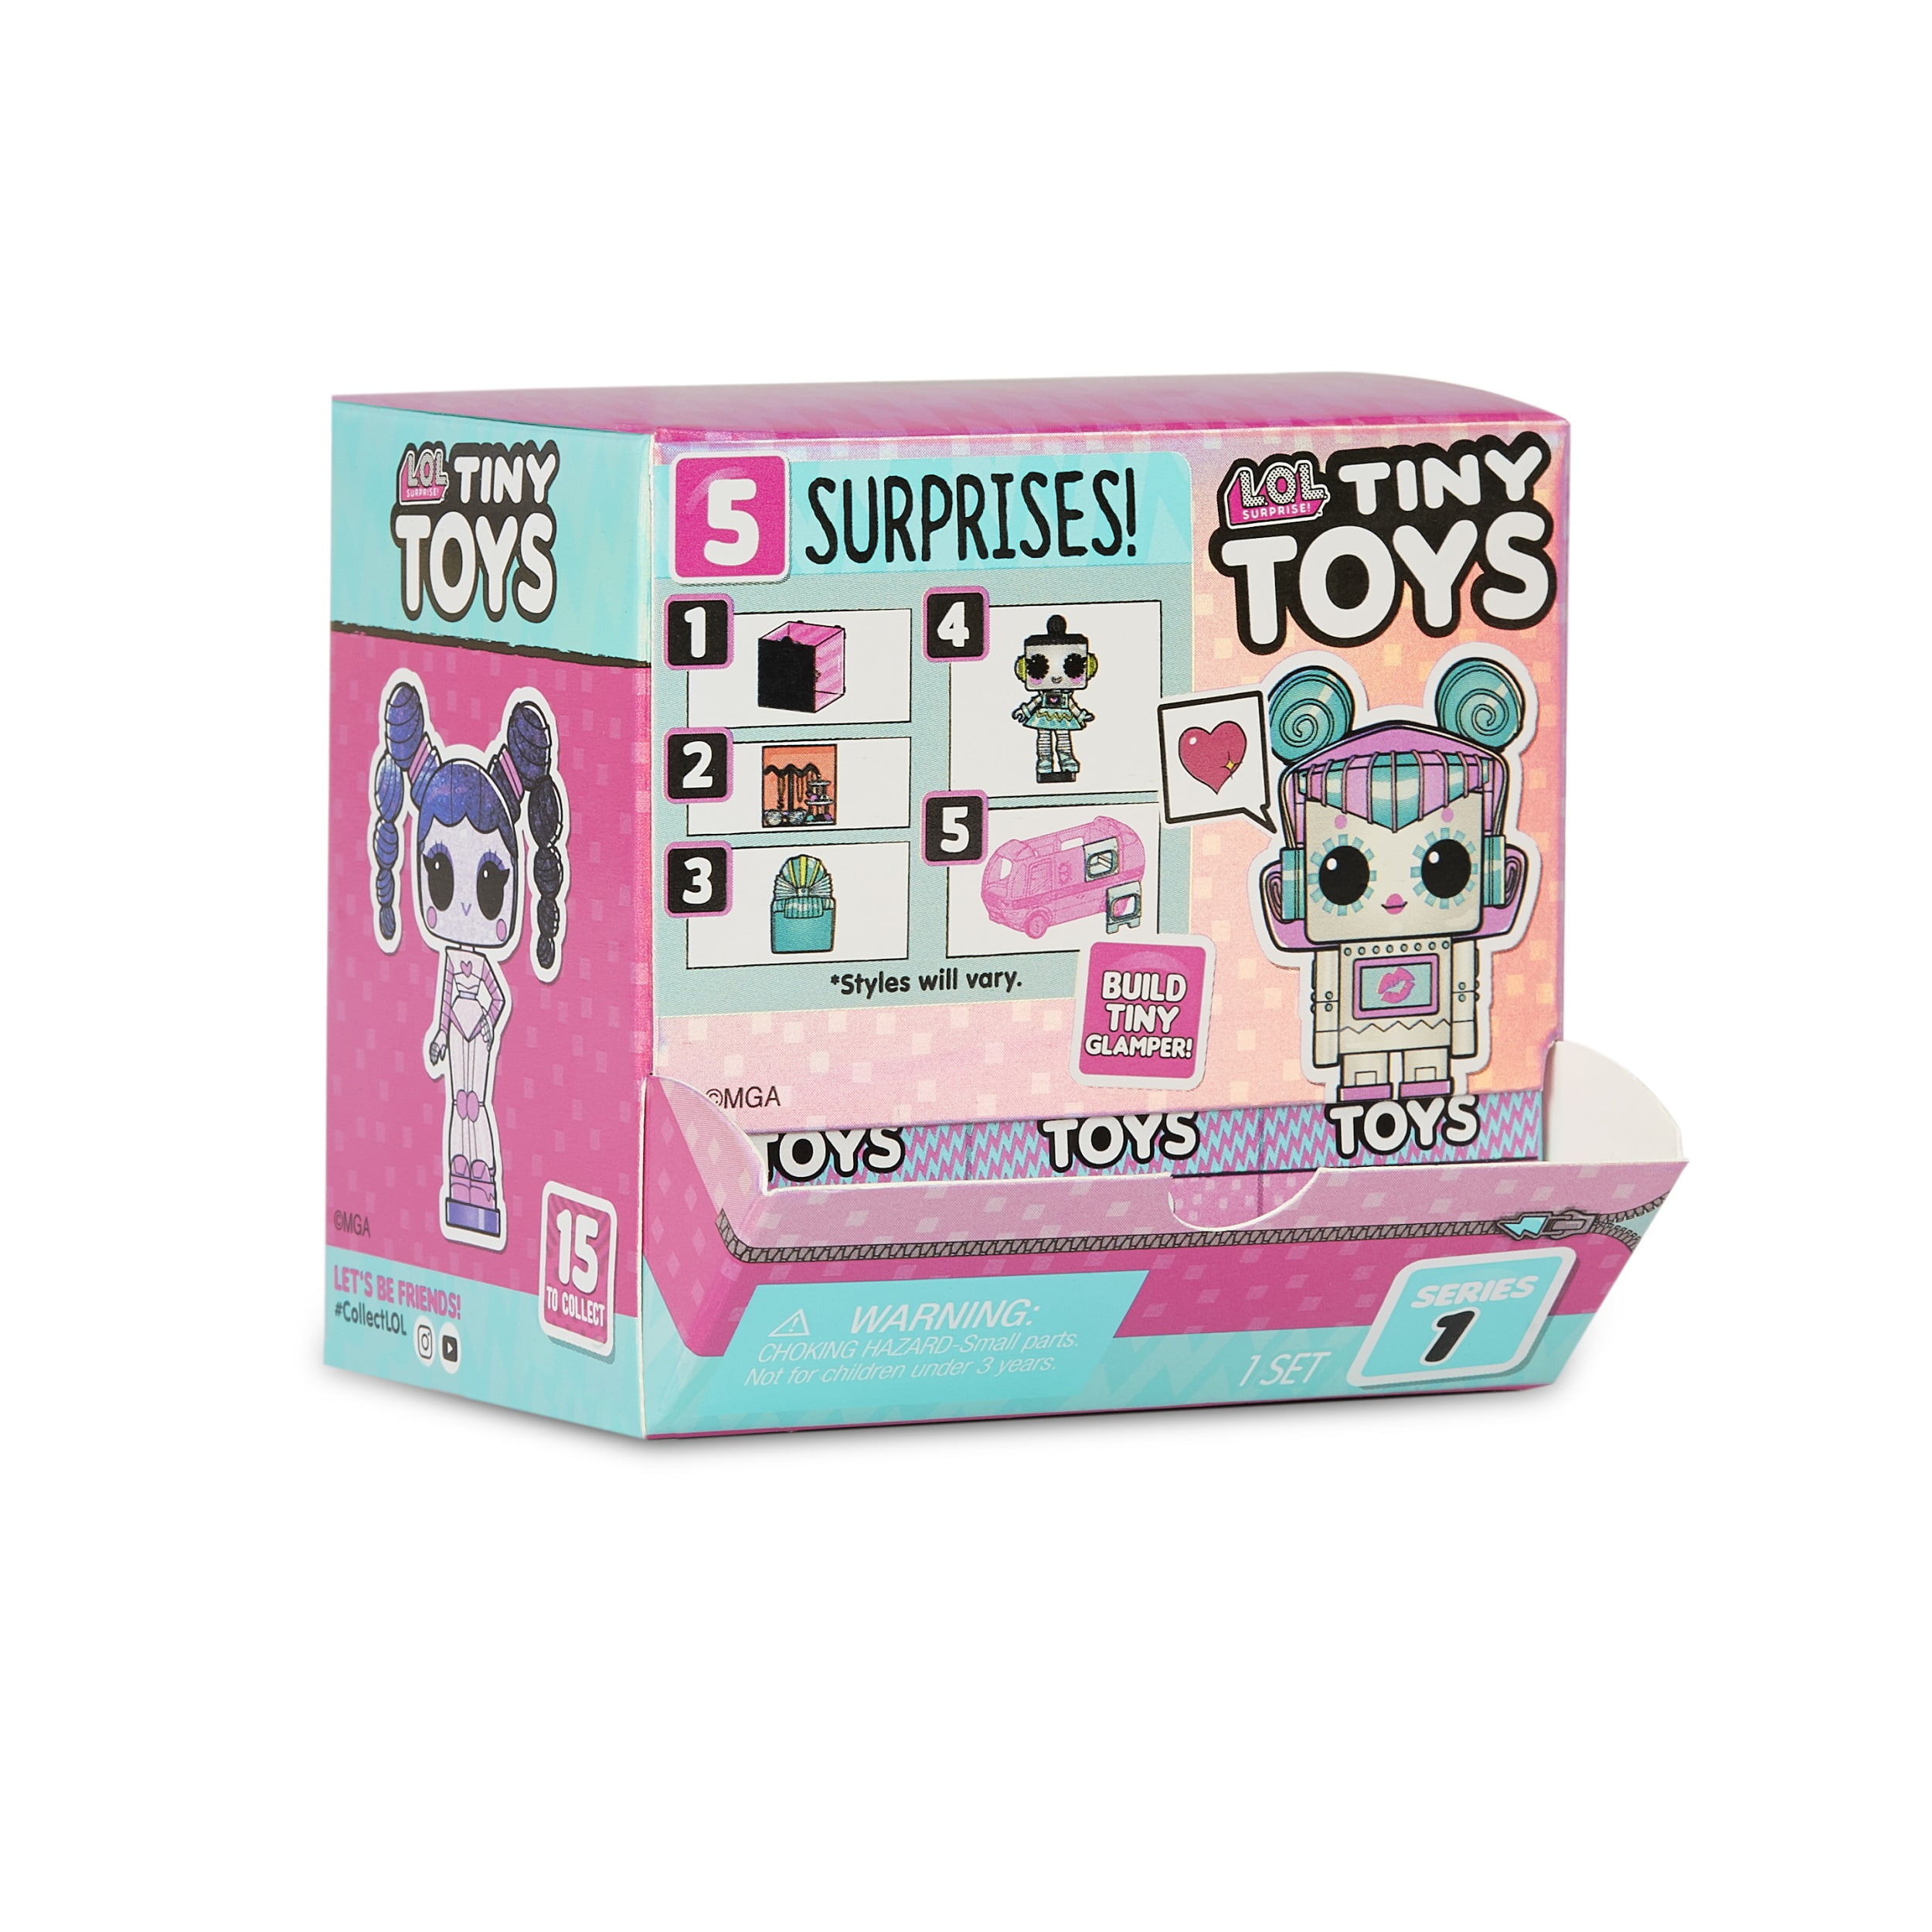 LOL SURPRISE TINY TOYS CREA GLAMPER TRAILER ROULOTTE CAROVANA OMG CANDYLICIOUS 